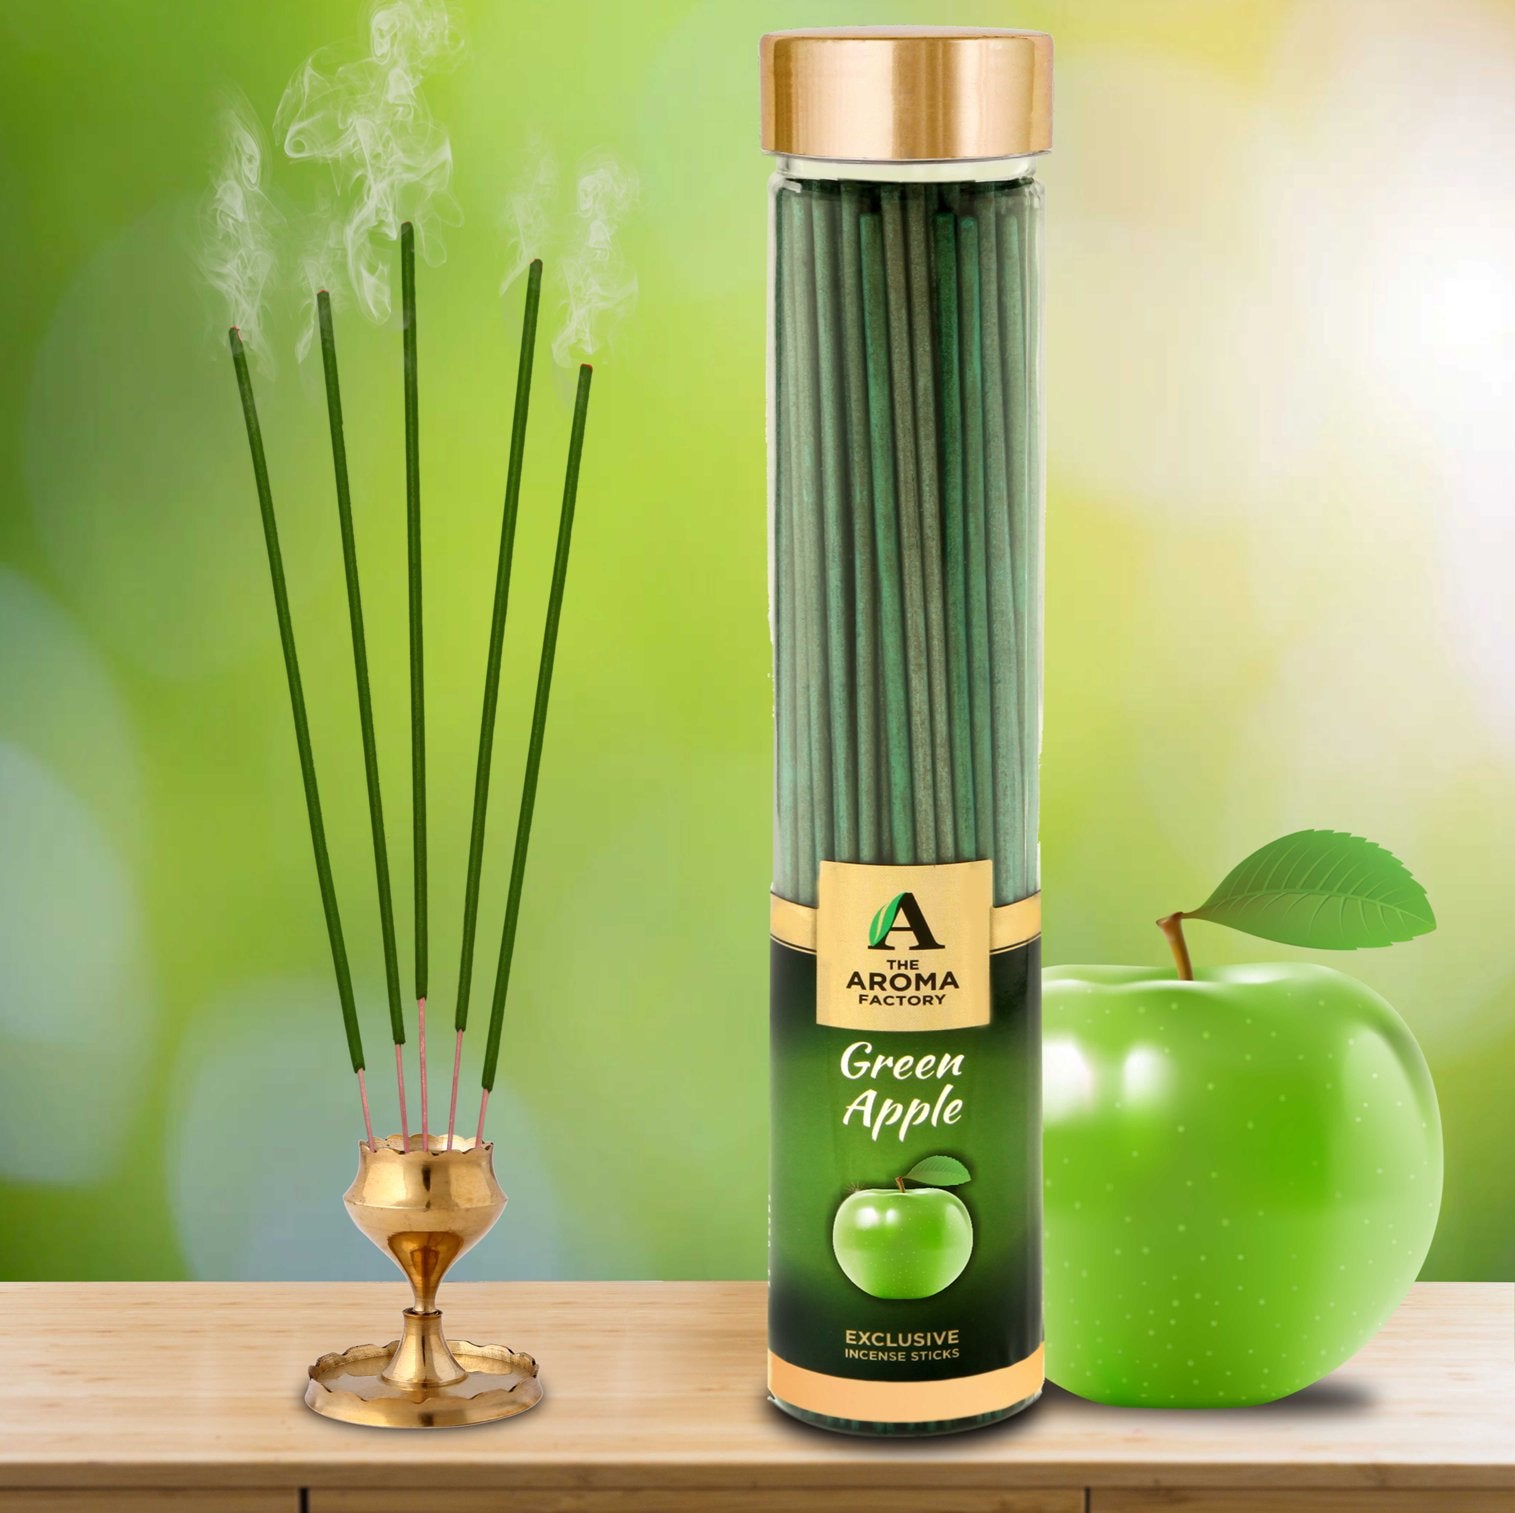 The Aroma Factory Green Apple Incense Sticks Agarbatti (Charcoal Free & 100% Herbal) Bottle, 100g